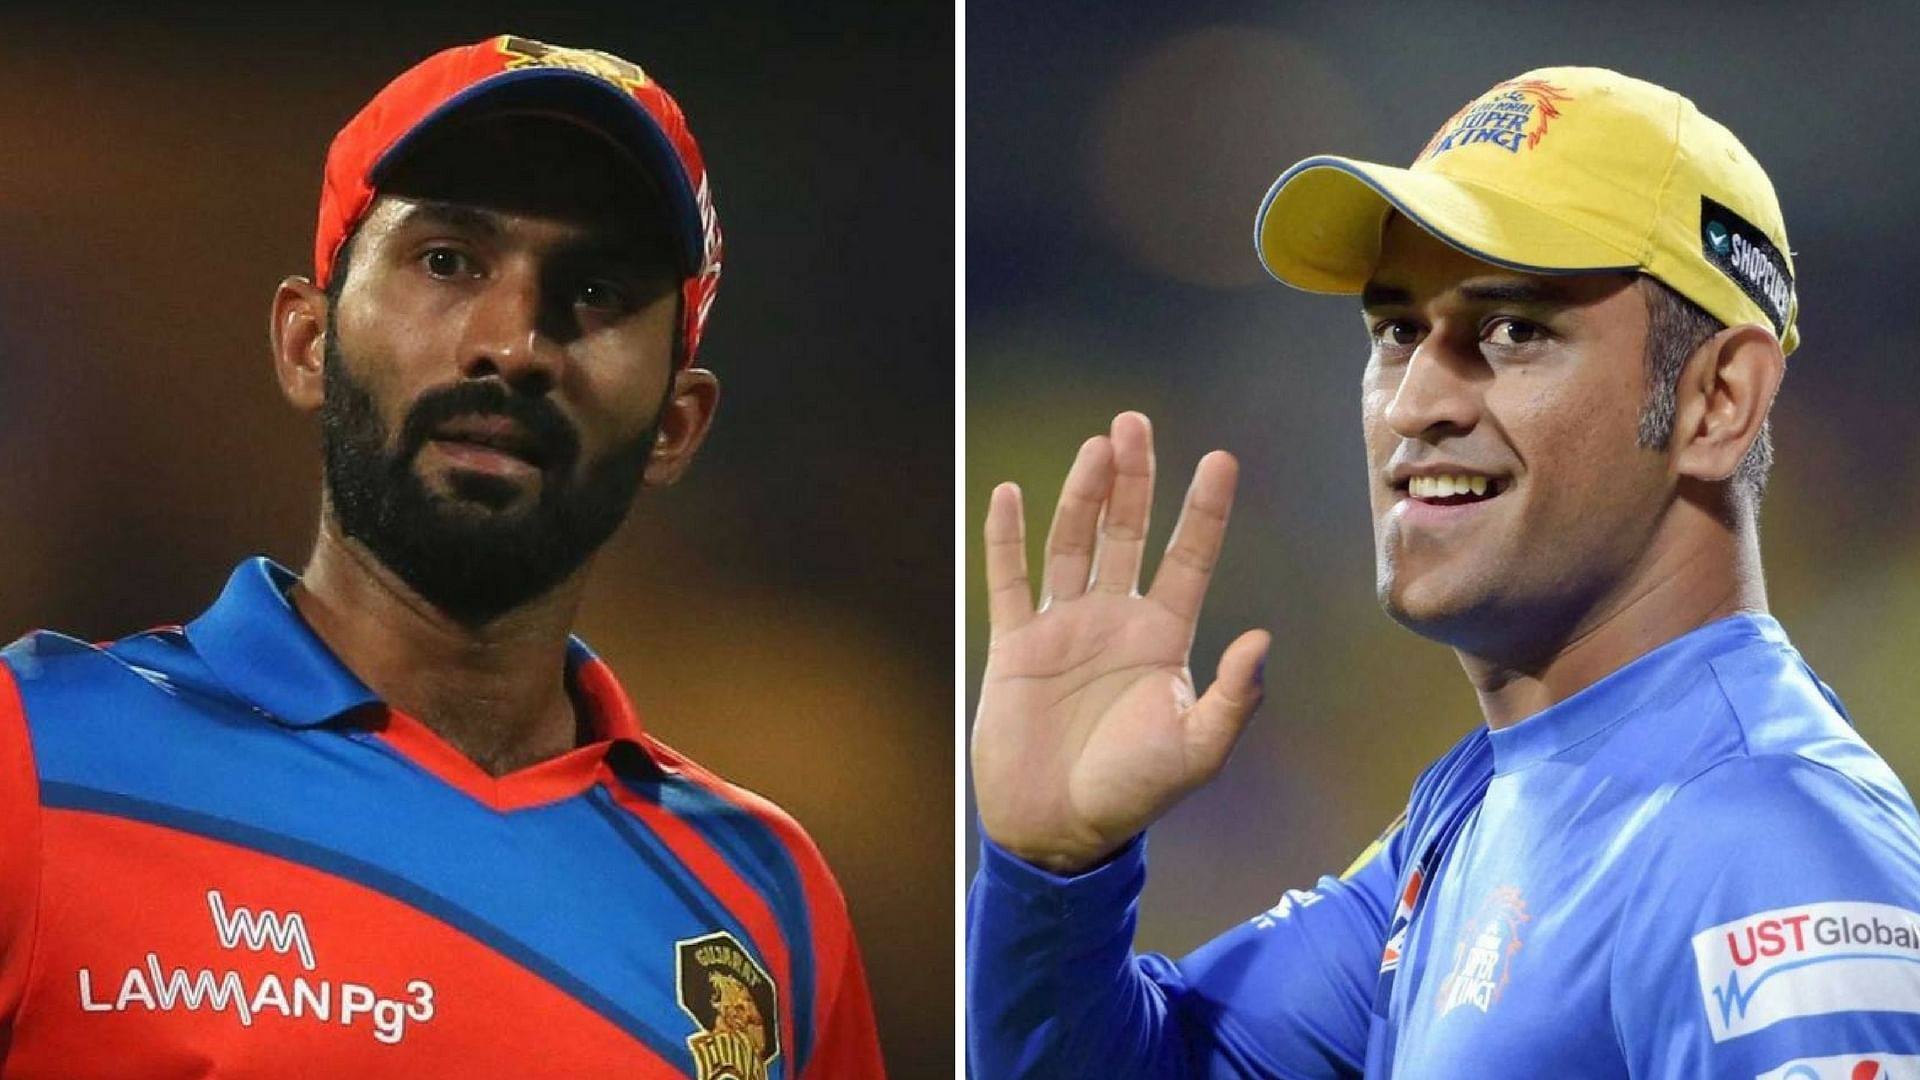 Dinesh Karthik (left) and MS Dhoni (right) will be seen captaining their teams KKR and CSK respectively in IPL 2018.&nbsp;